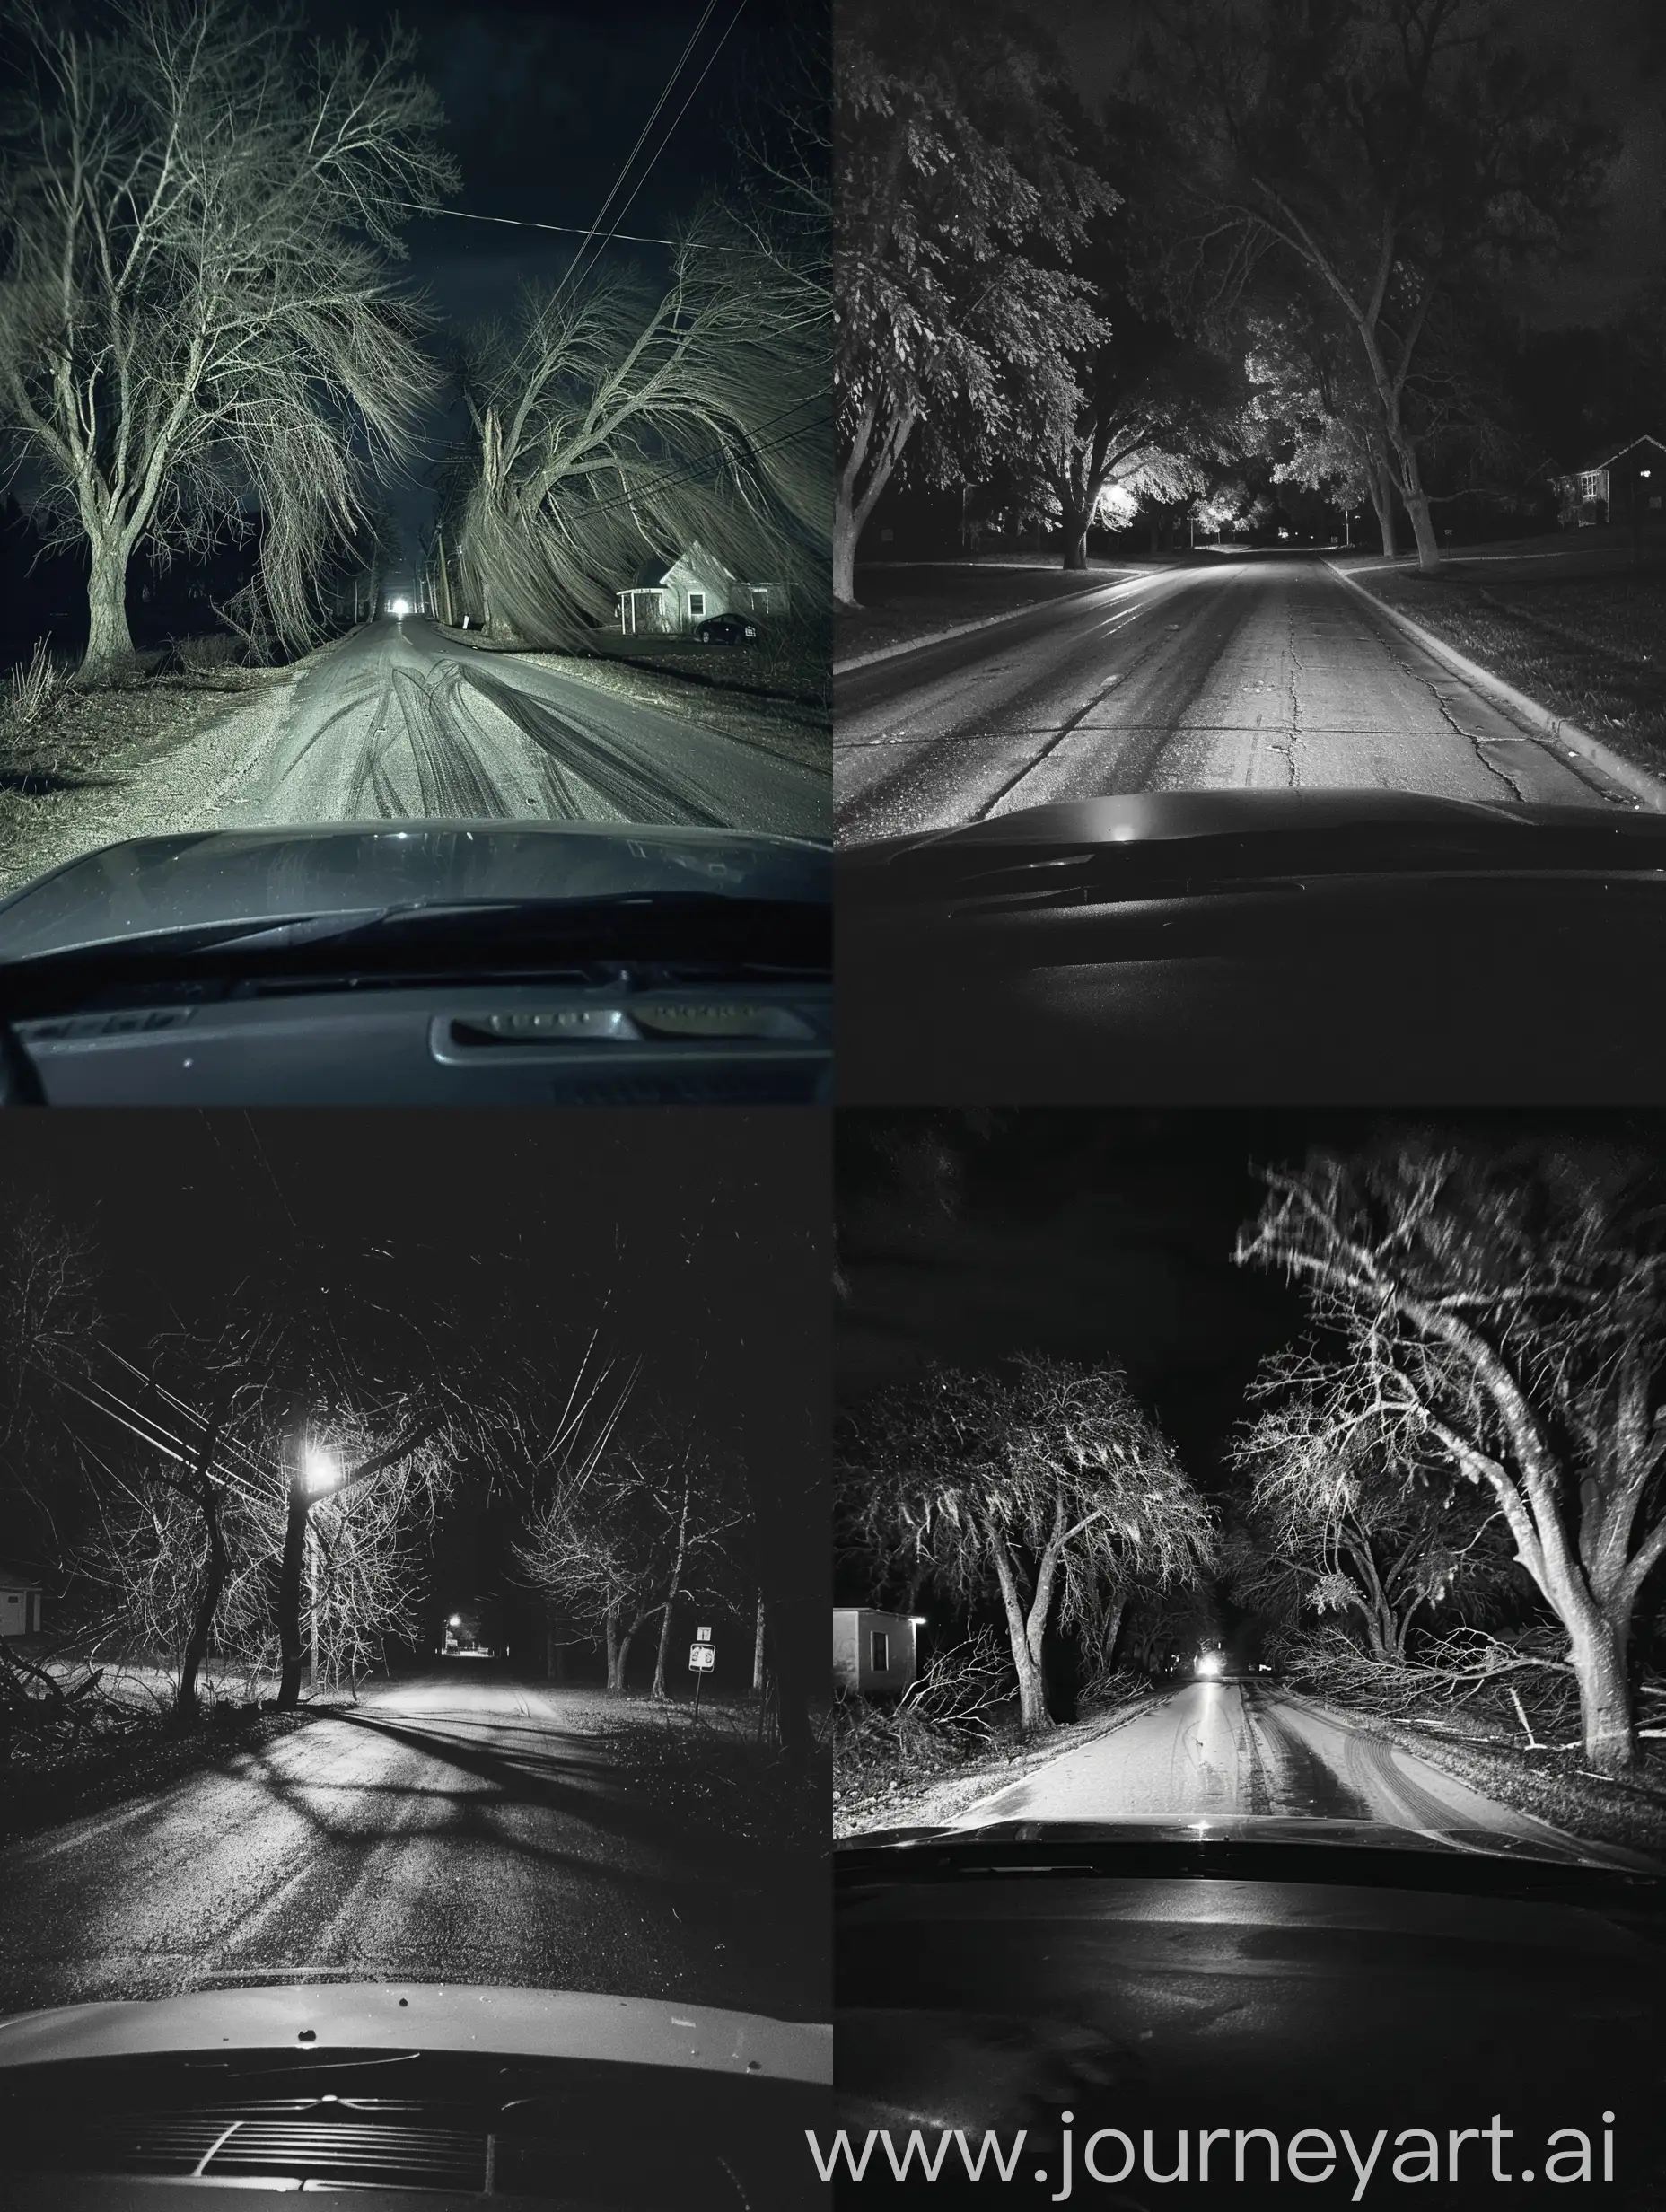 As I sat in my car, a sense of unease washed over me as I observed the quiet street. The swaying trees cast eerie shadows on the deserted road, amplifying the typical night's unease in this small town.